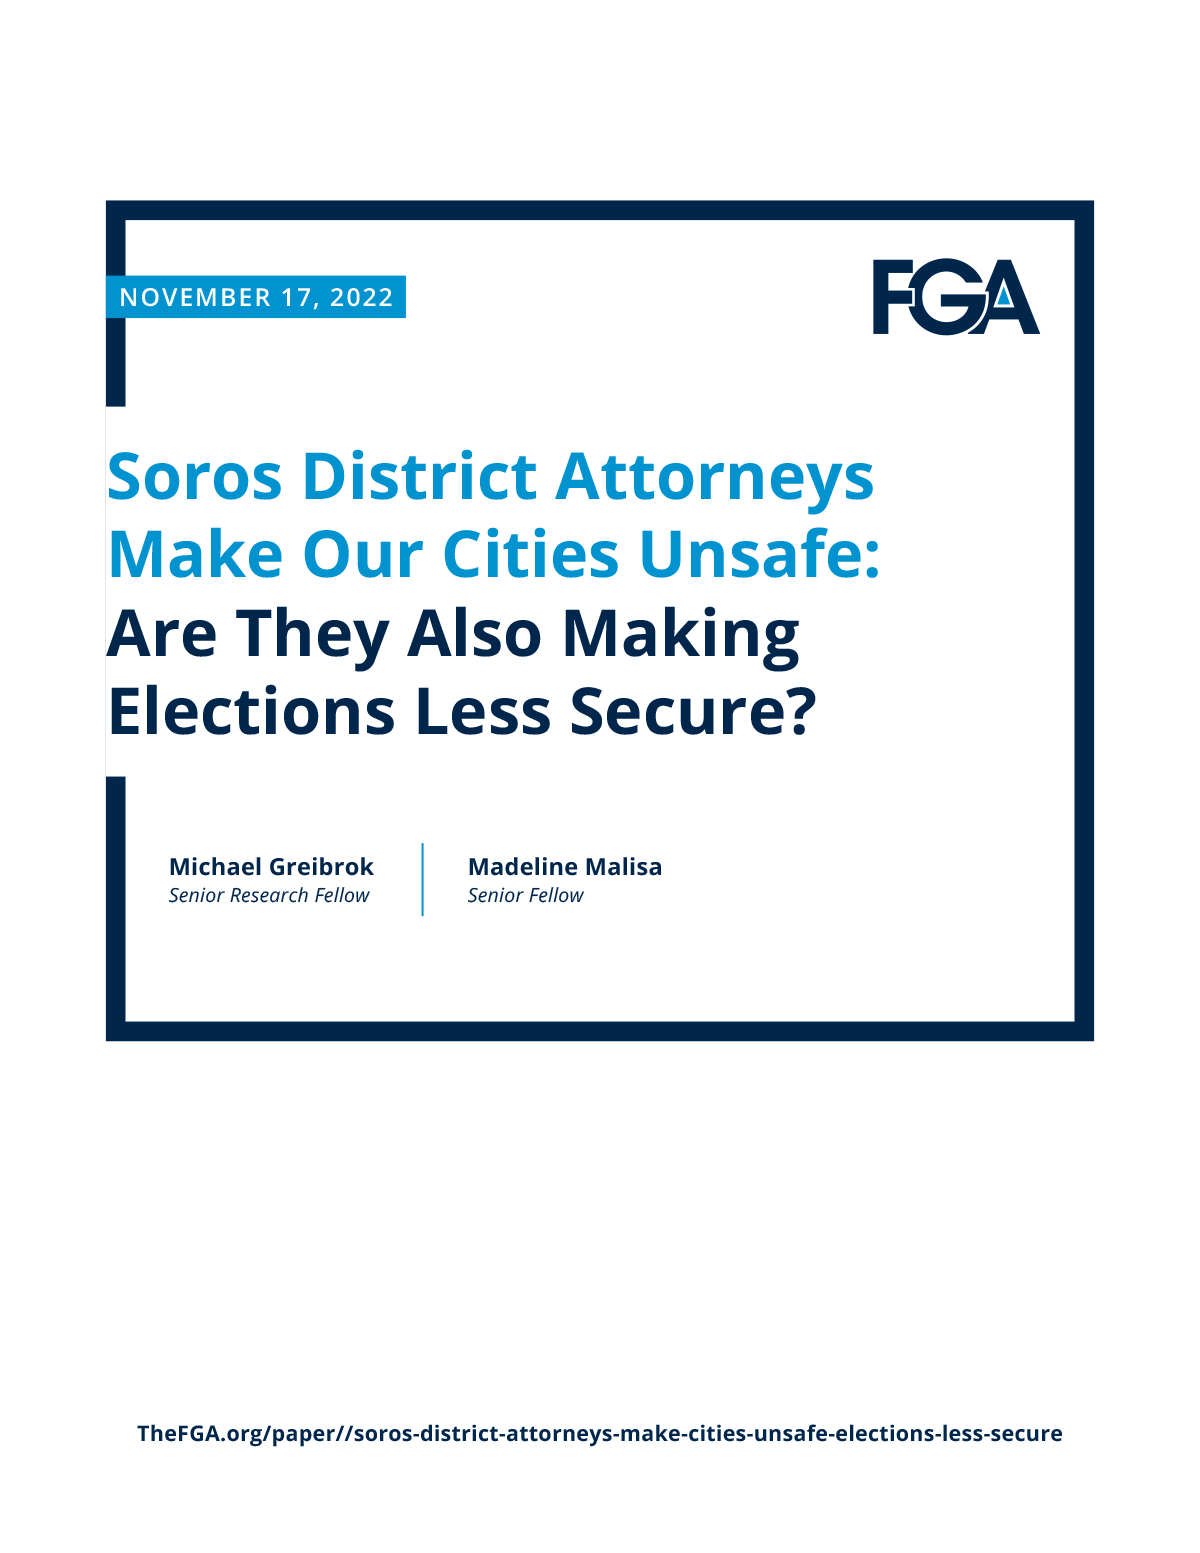 Soros District Attorneys Make Our Cities Unsafe: Are They Also Making Elections Less Secure?